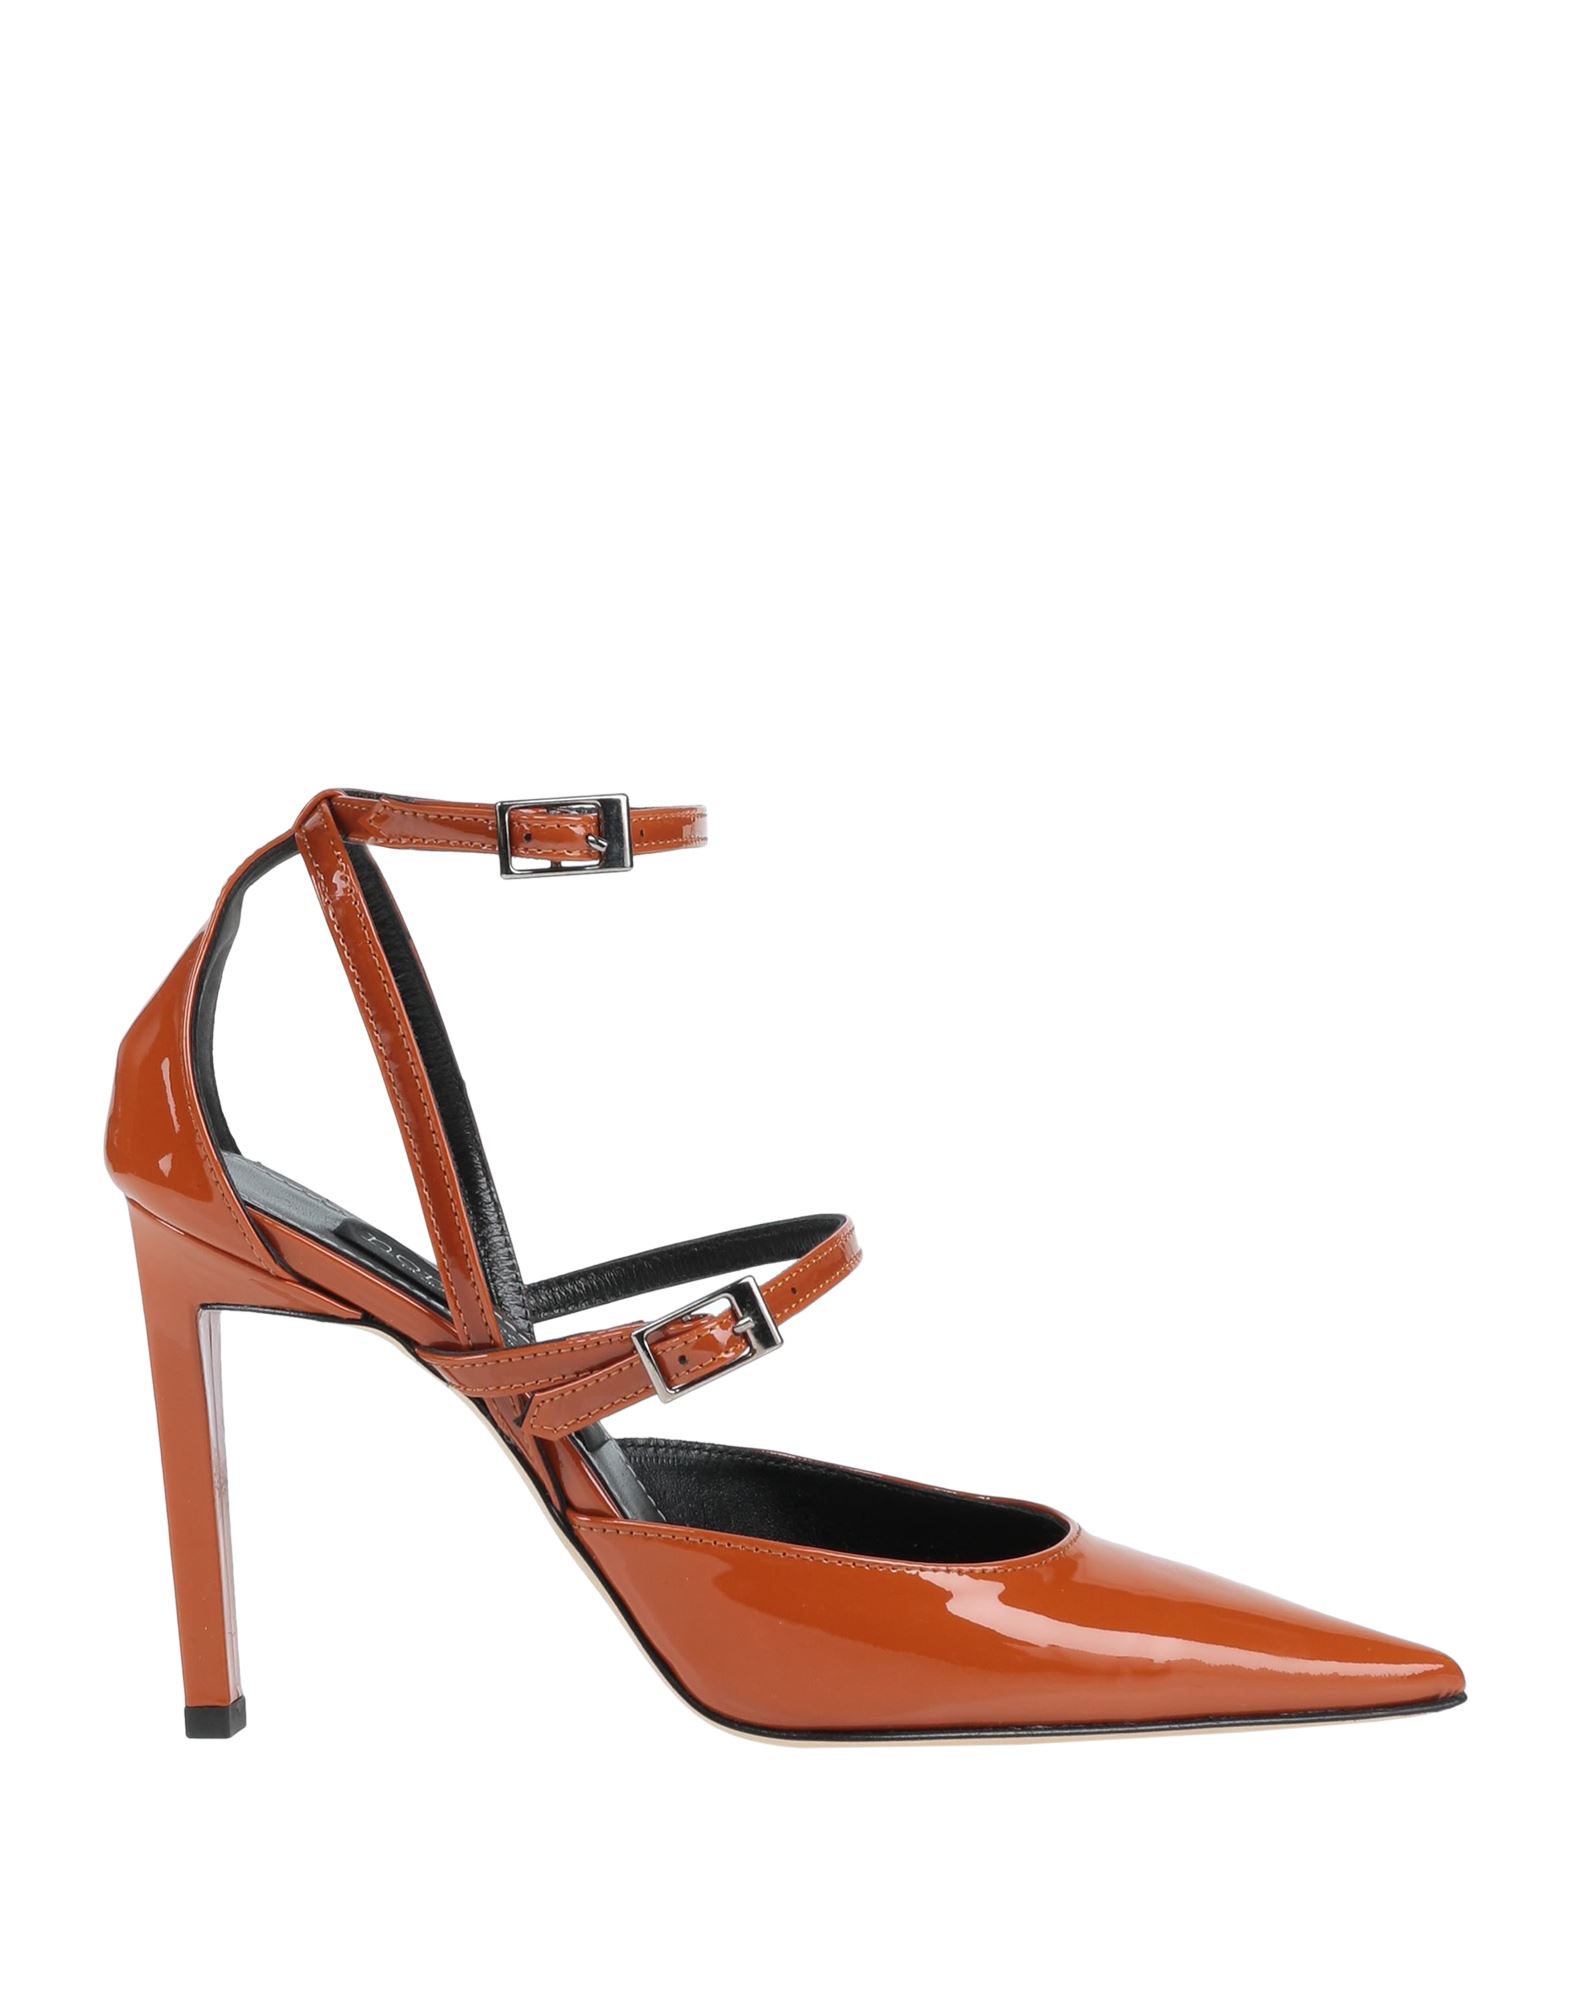 Nora Barth Pumps In Brown